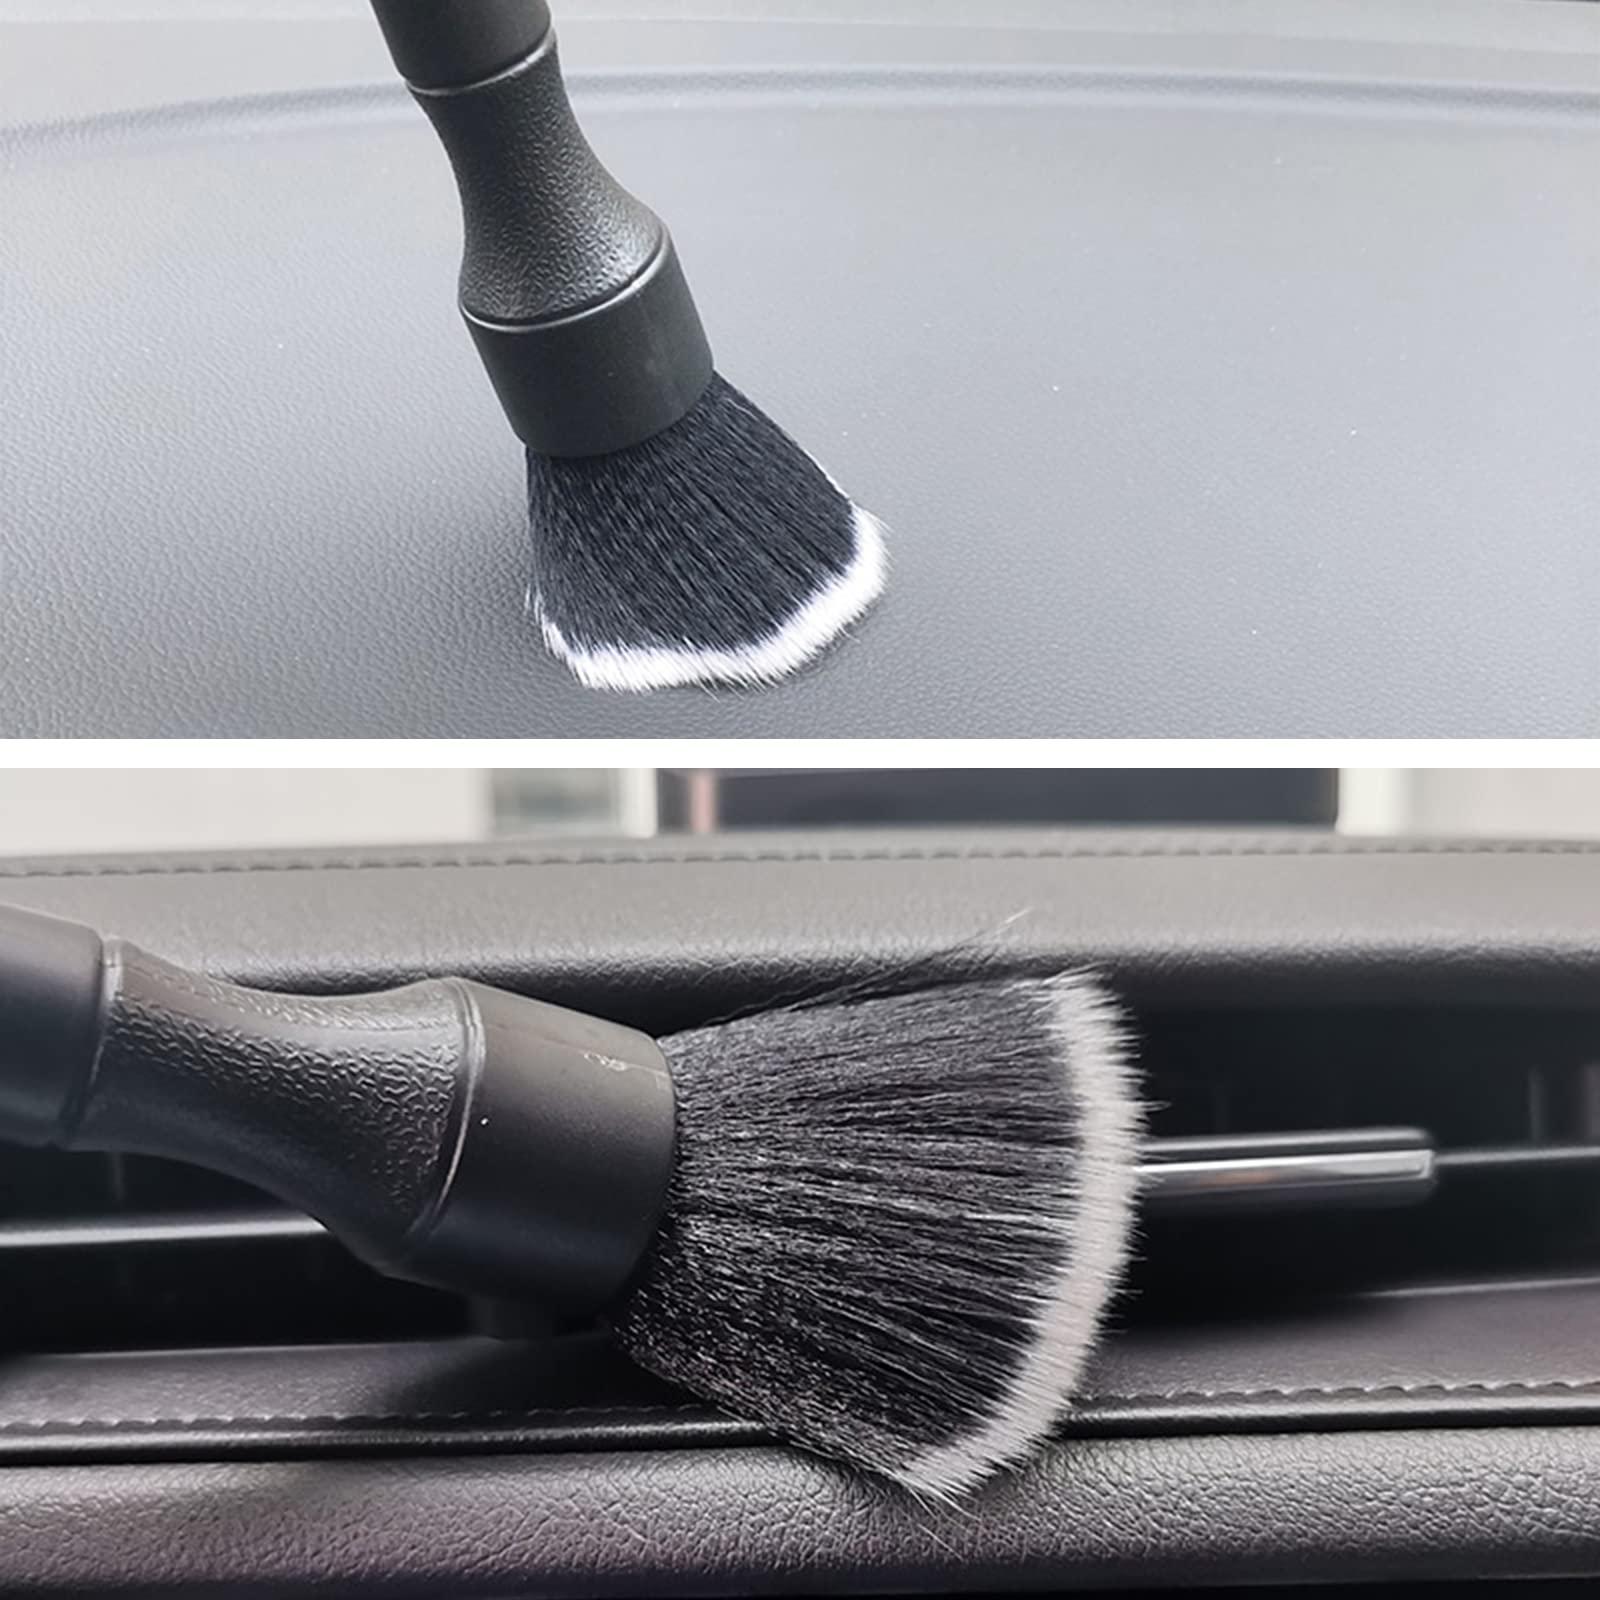 ALI2 Detailing Brush Set,Soft Comfortable Grip for Car Interior and Exterior Detailing Cleaning,Black 7